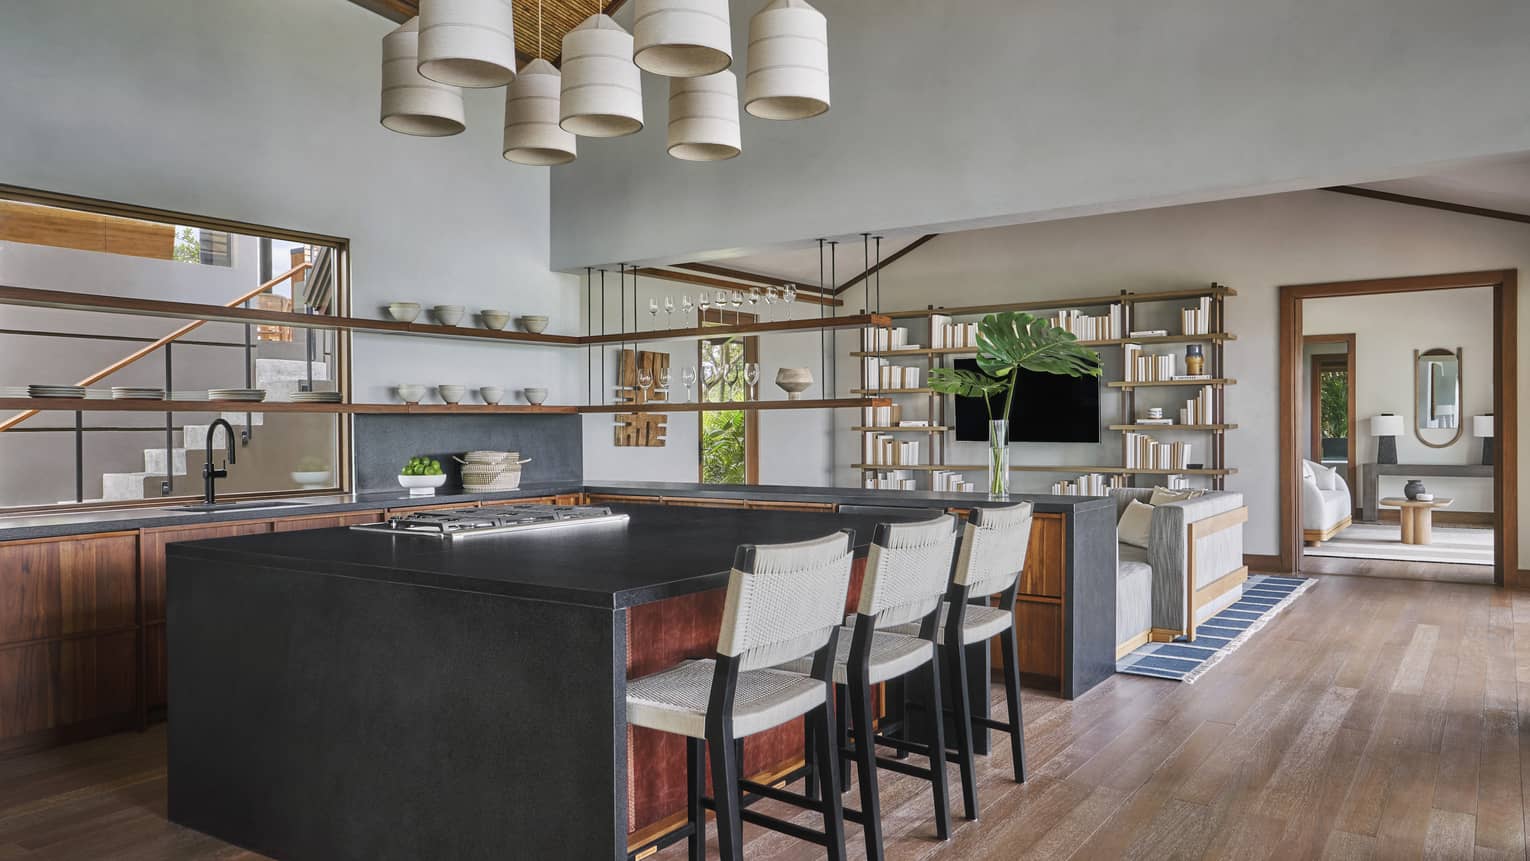 Kitchen with wooden floors, three counter-height chairs at island, multi-light hanging fixture